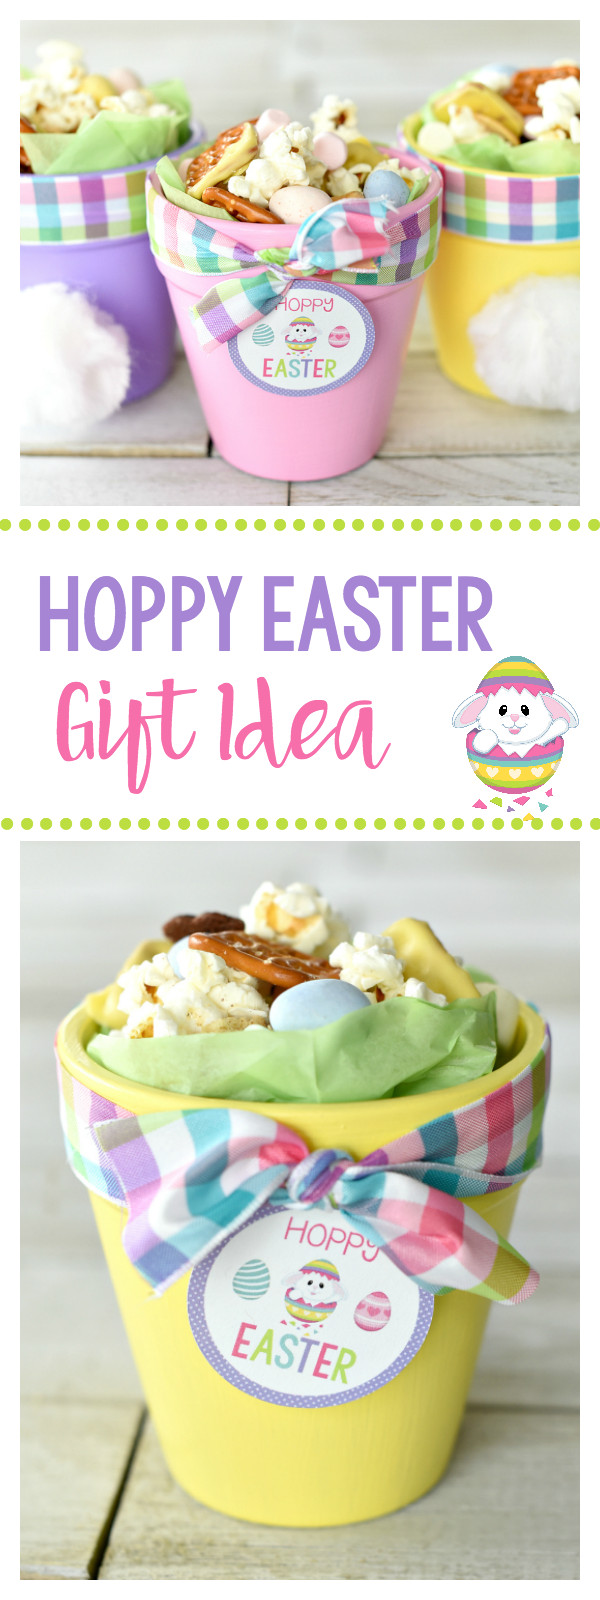 Cute Easter Picture Ideas
 Cute Easter Gift Ideas Hoppy Easter Bunny Pots – Fun Squared